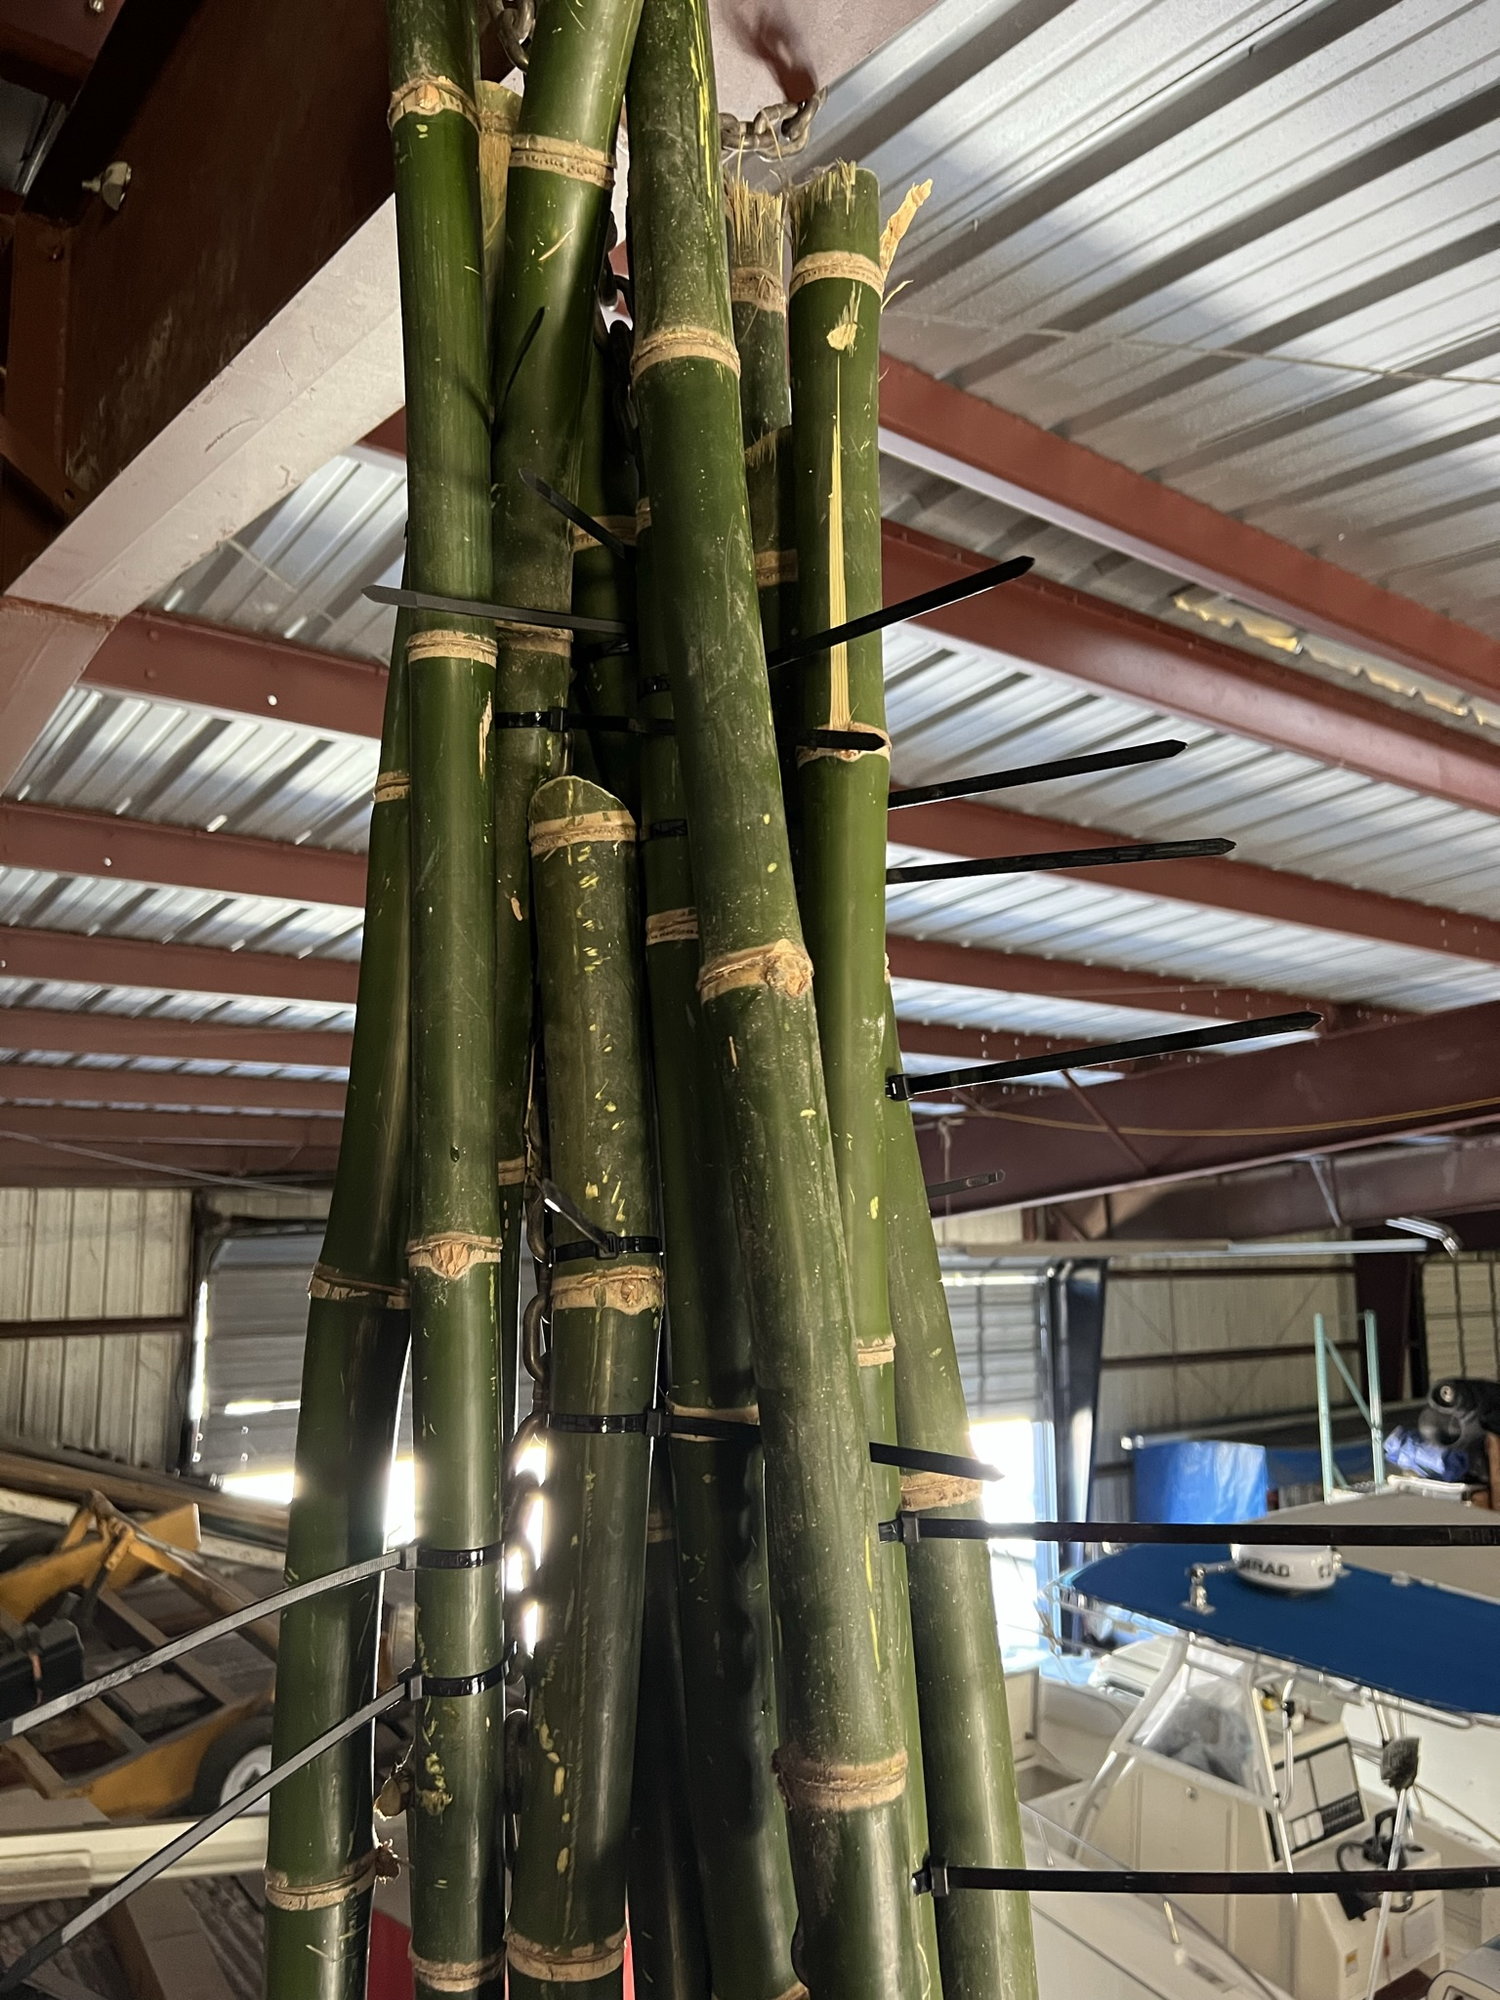 So you want a Calcutta Bamboo Gaff. - The Hull Truth - Boating